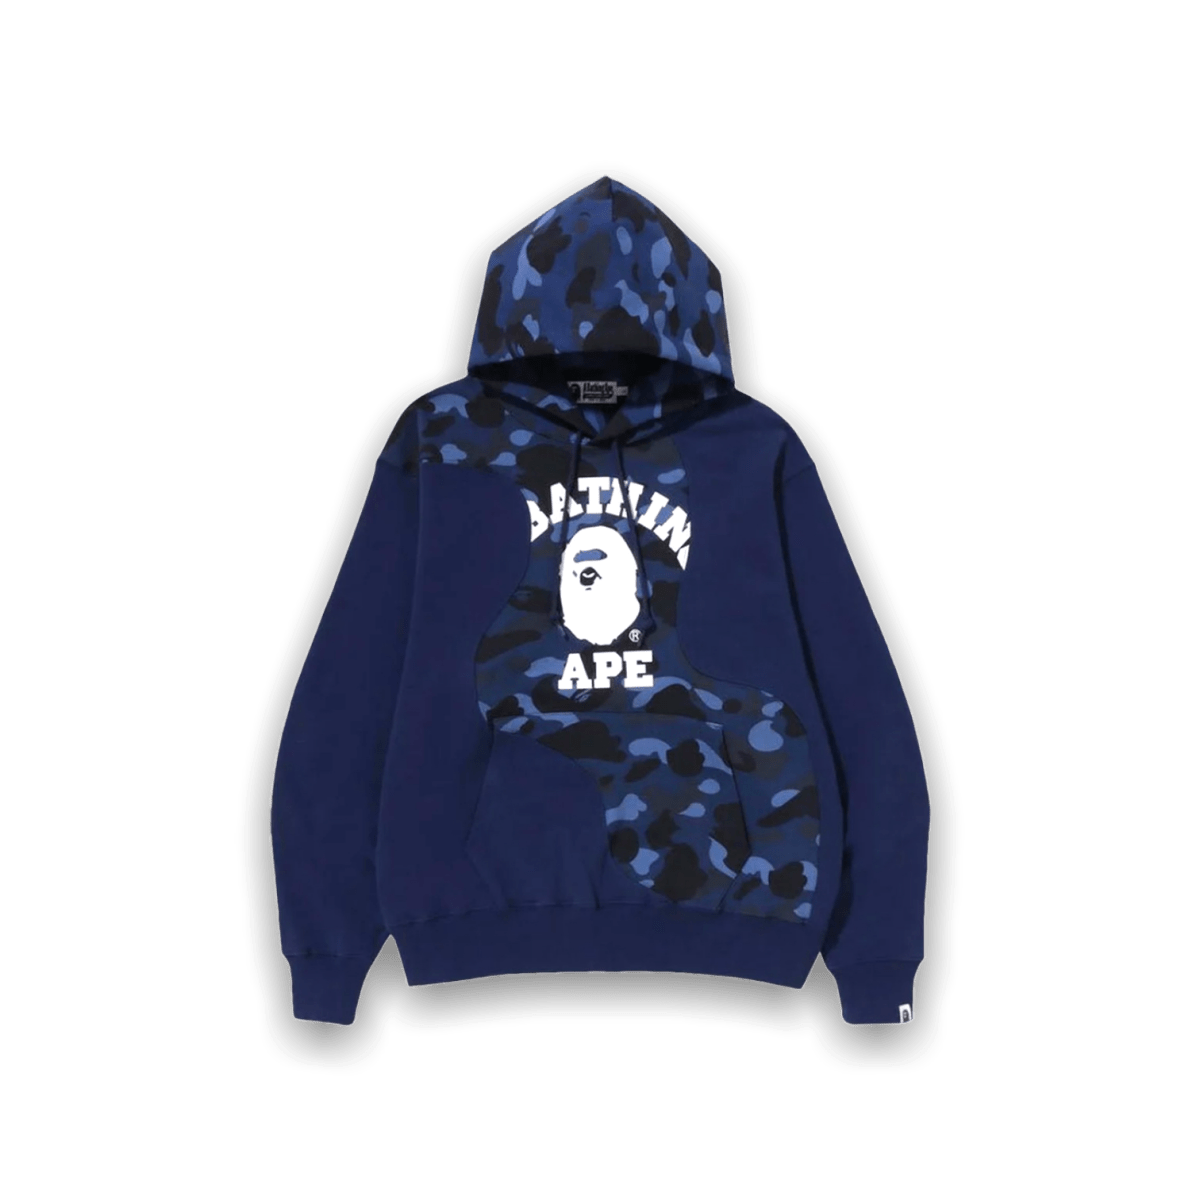 BAPE Color Camo College Cutting Relaxed Fit Hoodie 'Navy' - sneaker - Hoodie - Bape - Jawns on Fire